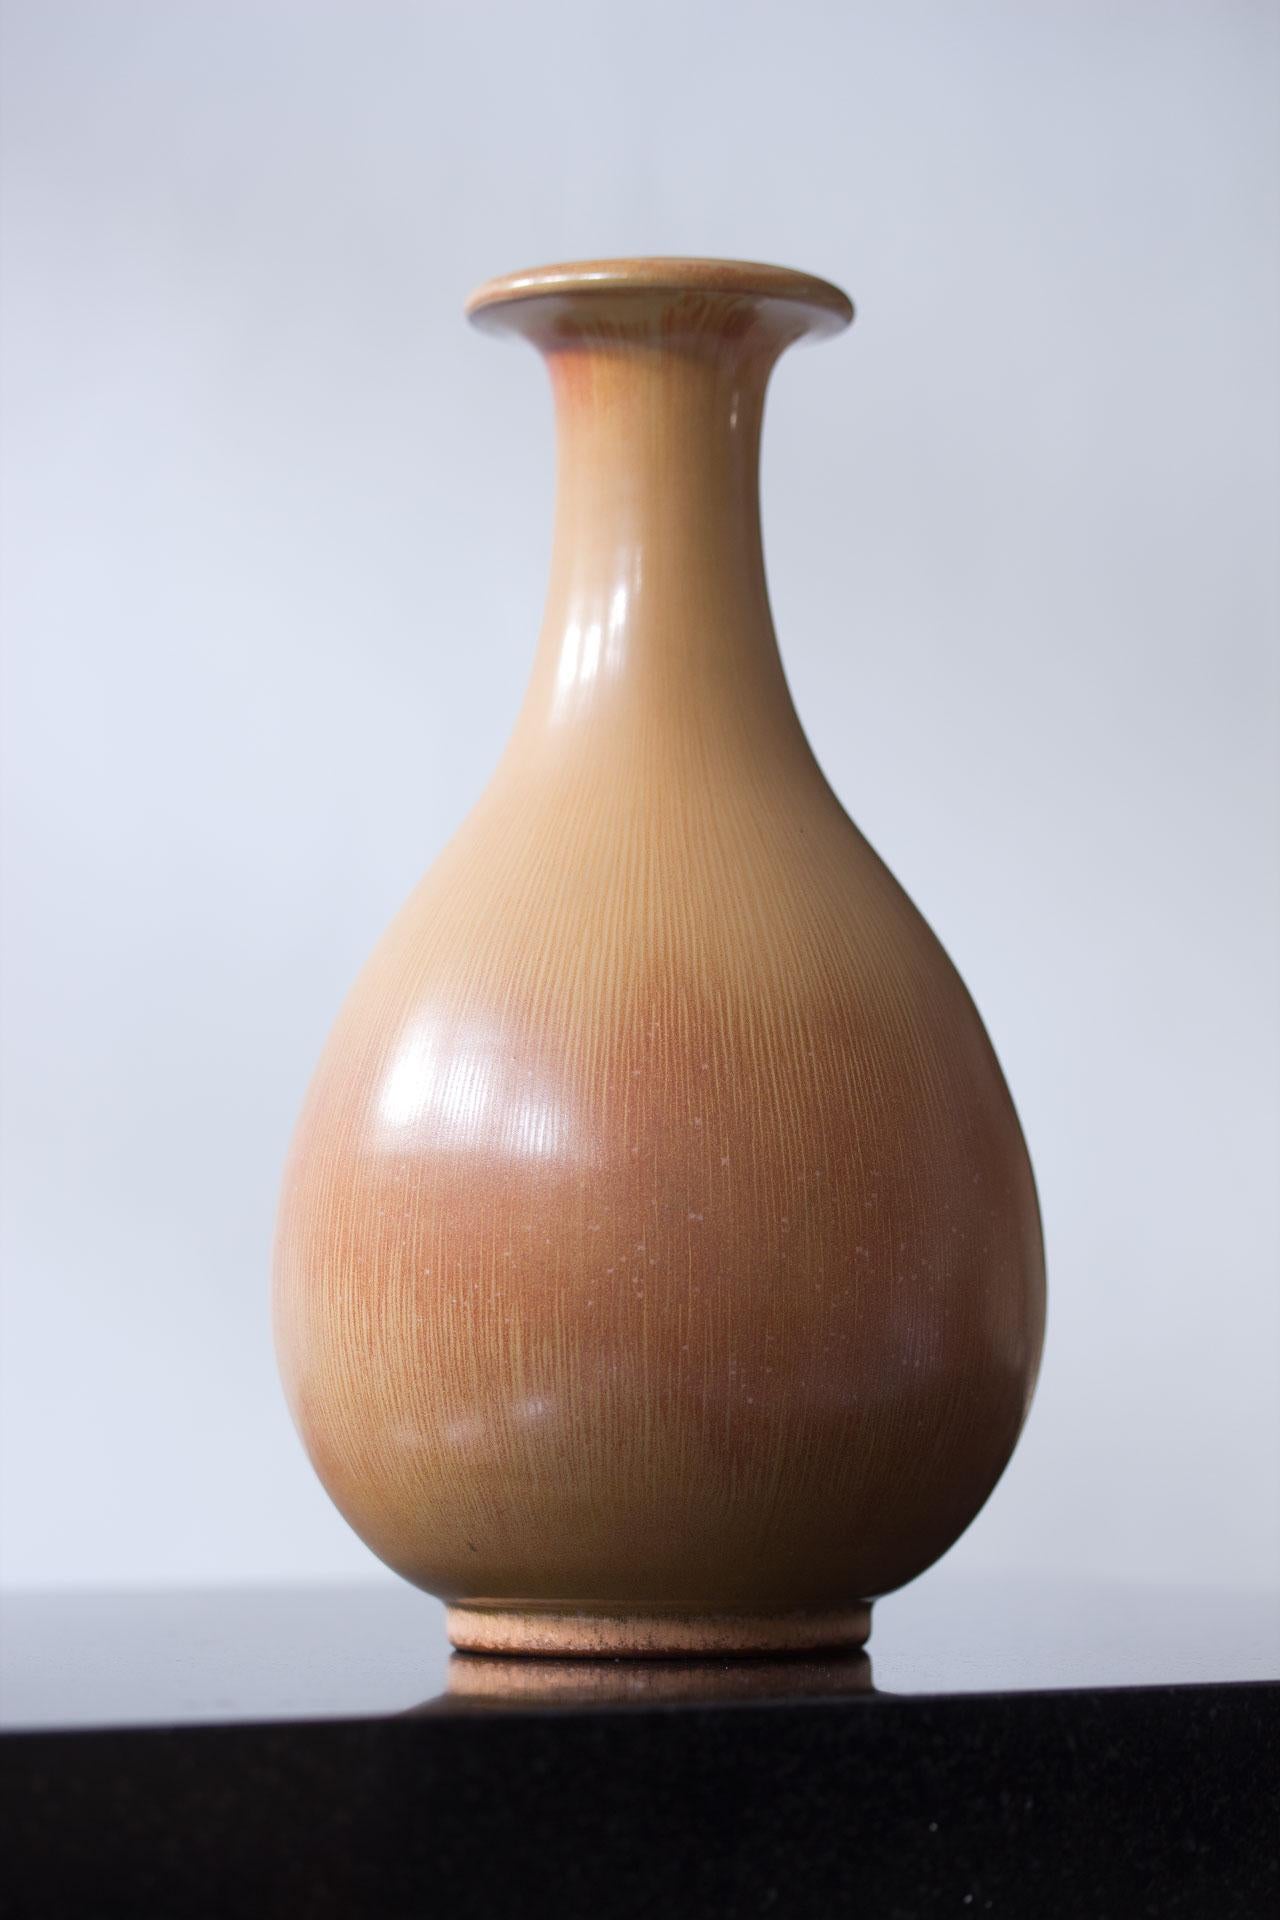 Beautiful ceramic vase designed by Gunnar Nylund, manufactured by Rörstrand in Sweden during the 1940s. Made from stoneware with hare fur glaze in sand to red ochre color.

Gunnar Nylund was artistic director at Rörstrand porcelain company, where he